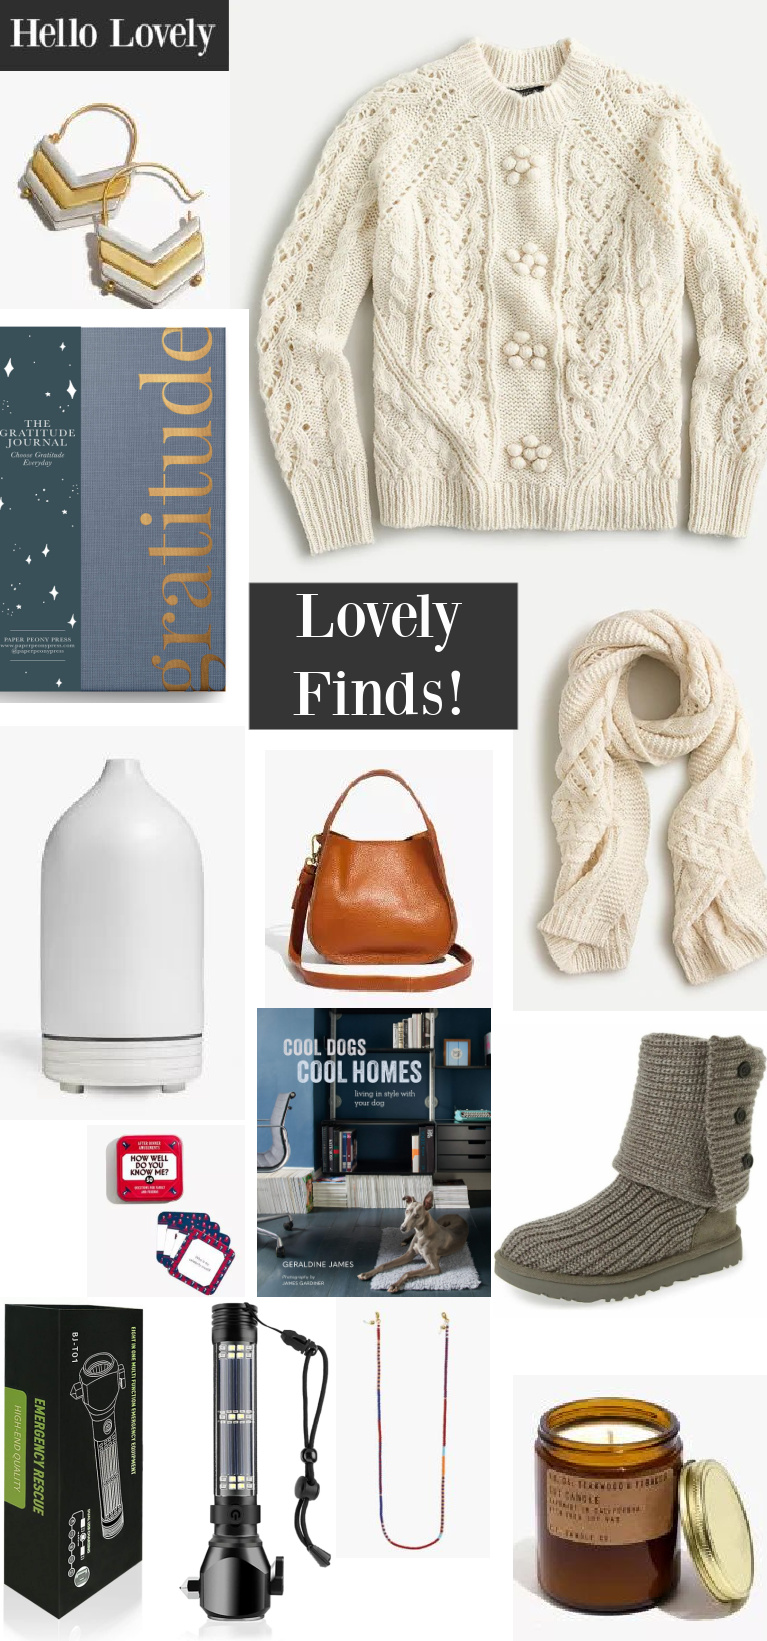 Hello Lovely Studio lovely finds cozy gift guide